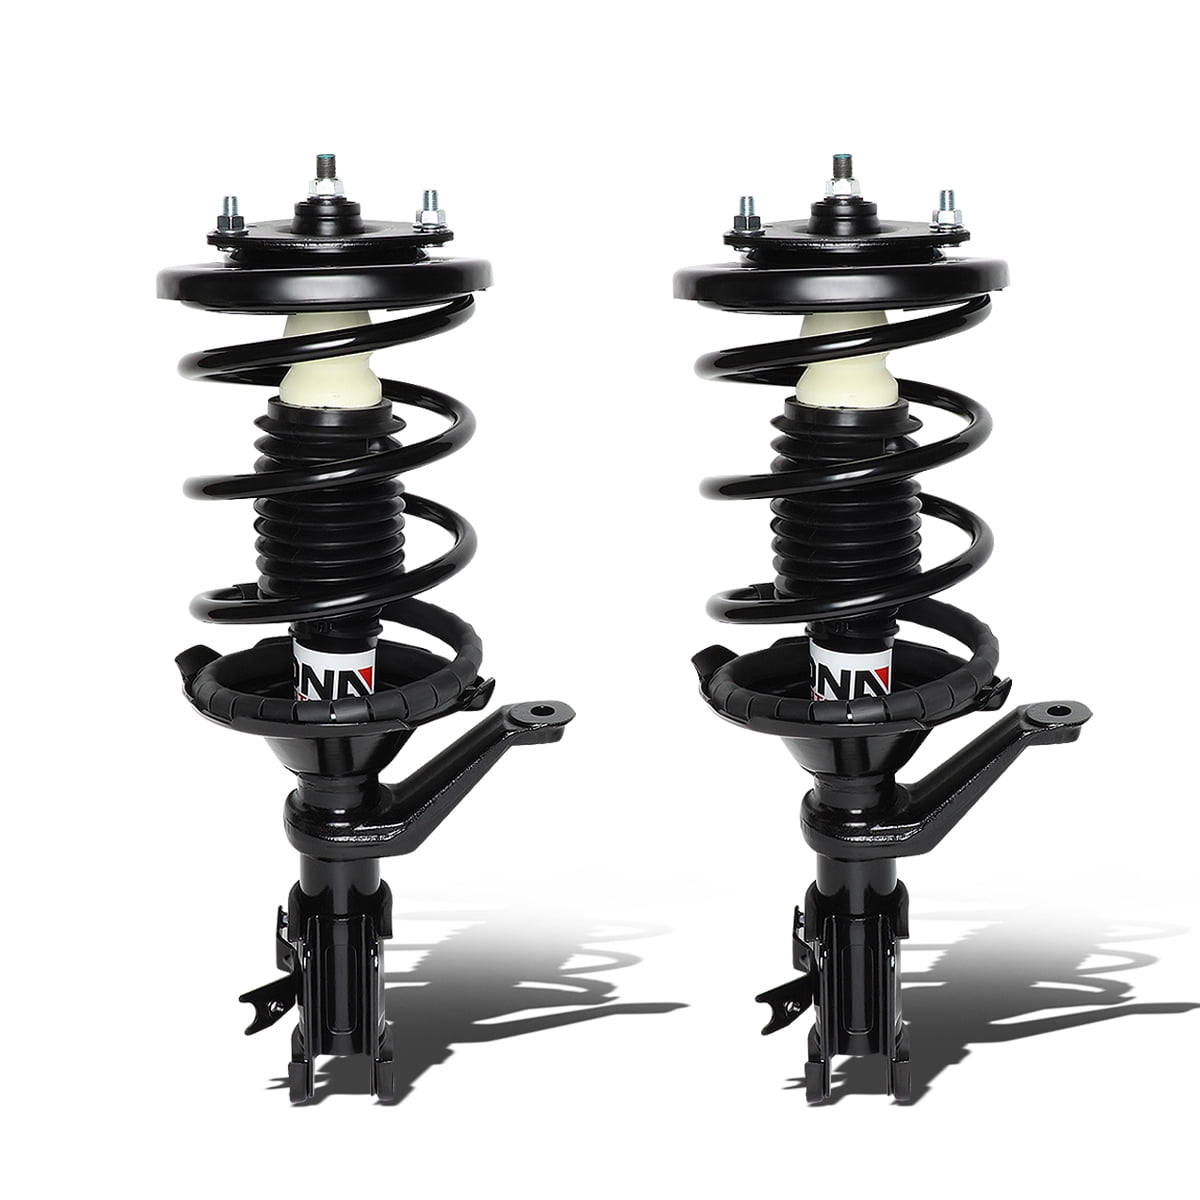 2 x FRONT COIL SPRING FOR HONDA CIVIC  2001-2005 NEW 2 x FRONT SHOCK ABSORBERS 